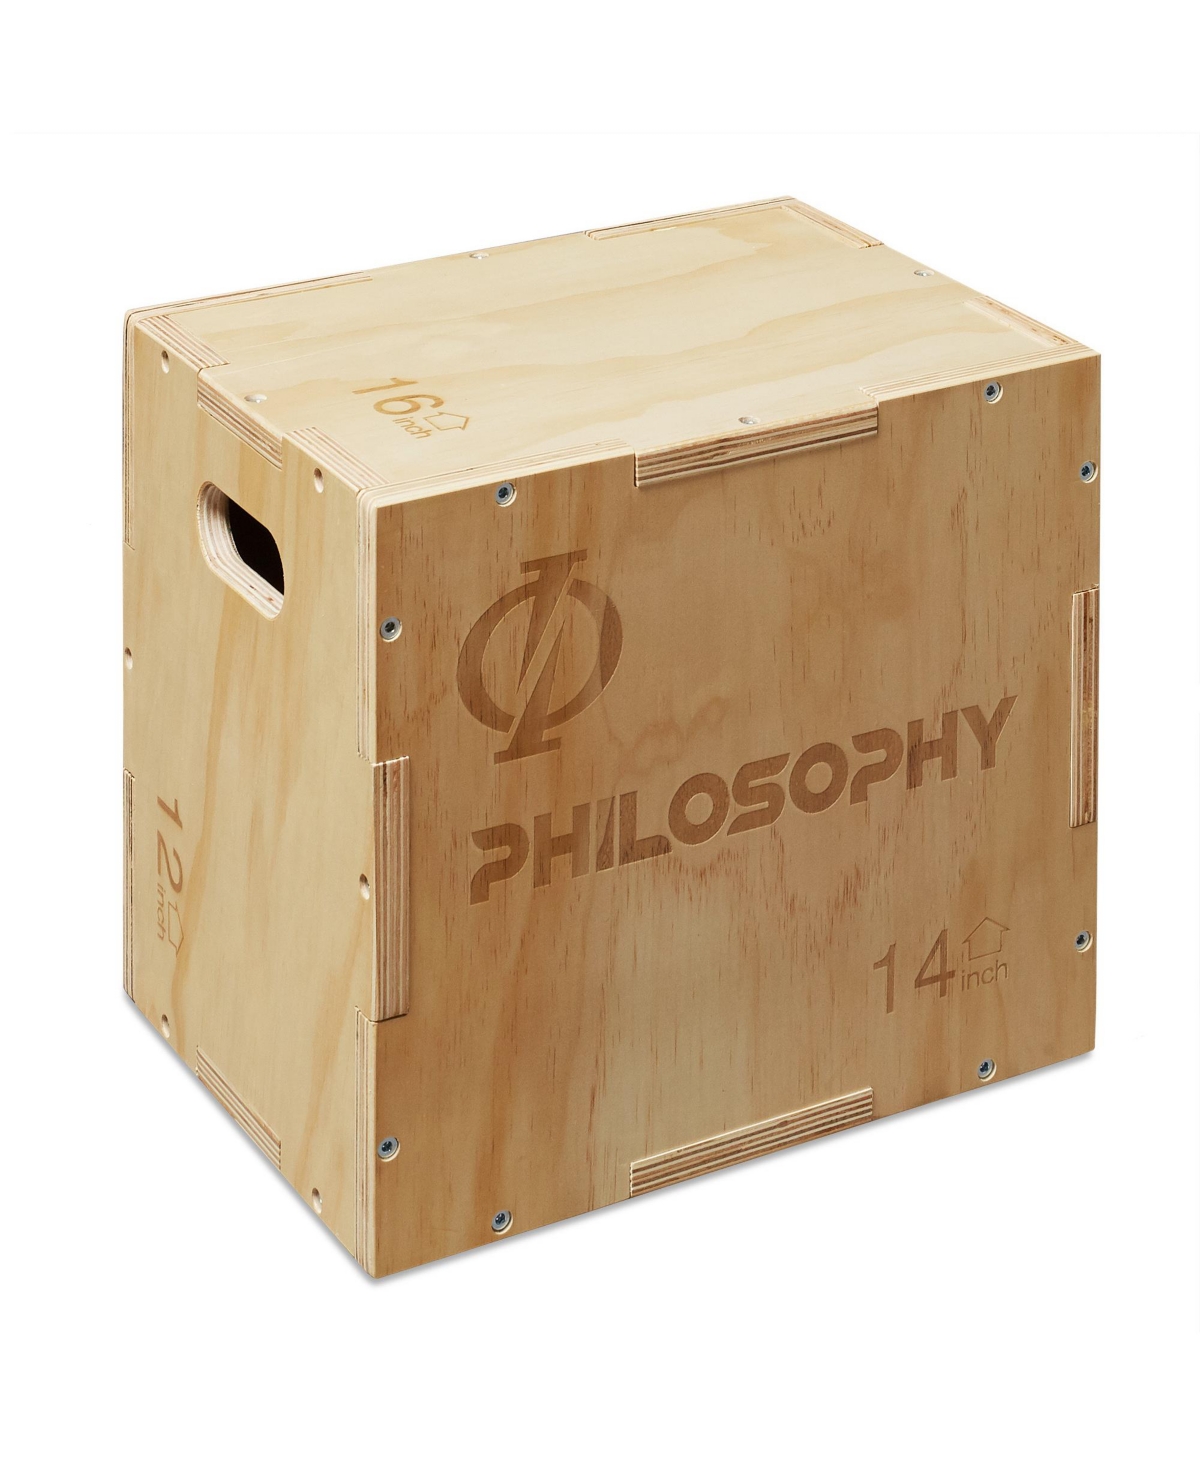 3 in 1 Wood Plyometric Box - 16" x 14" x 12" Jumping Plyo Box for Training and Conditioning - Natural